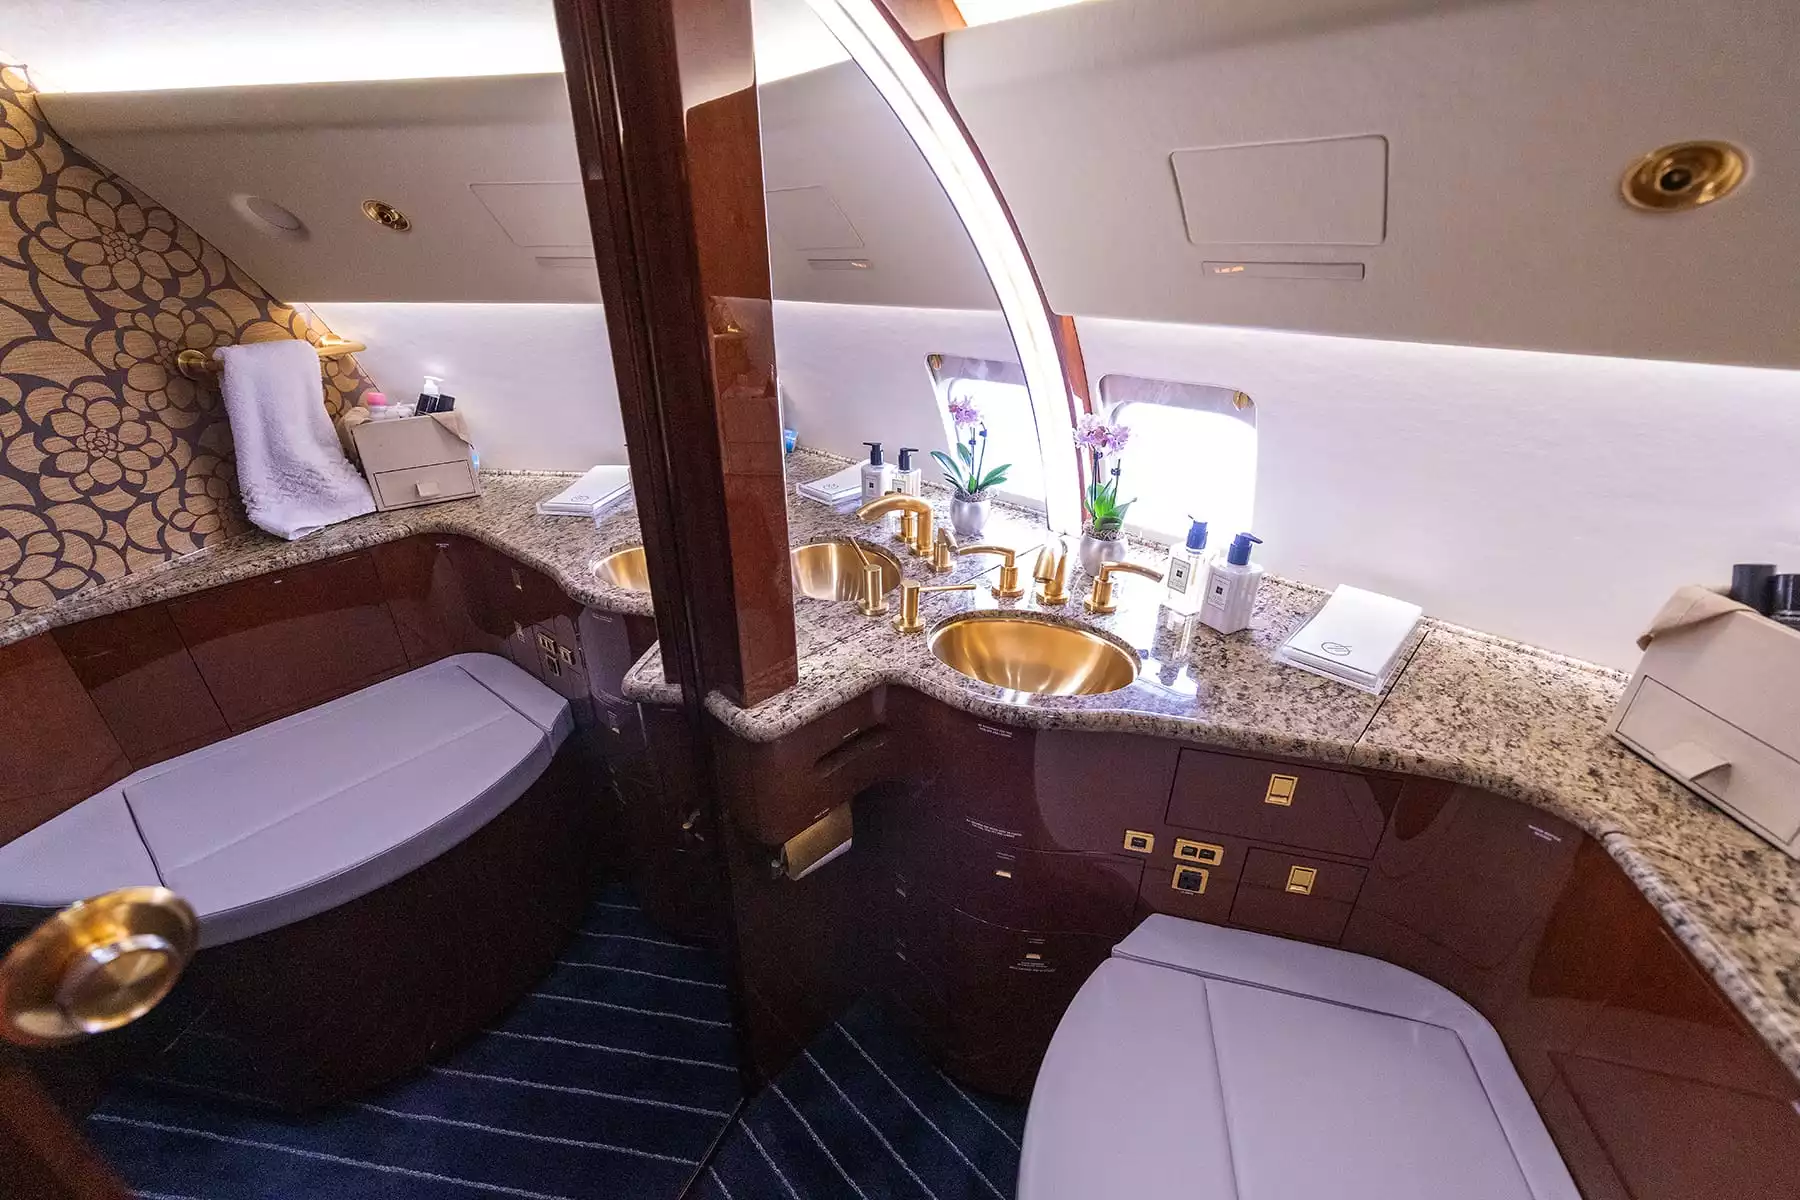 Inside the restroom of a private jet